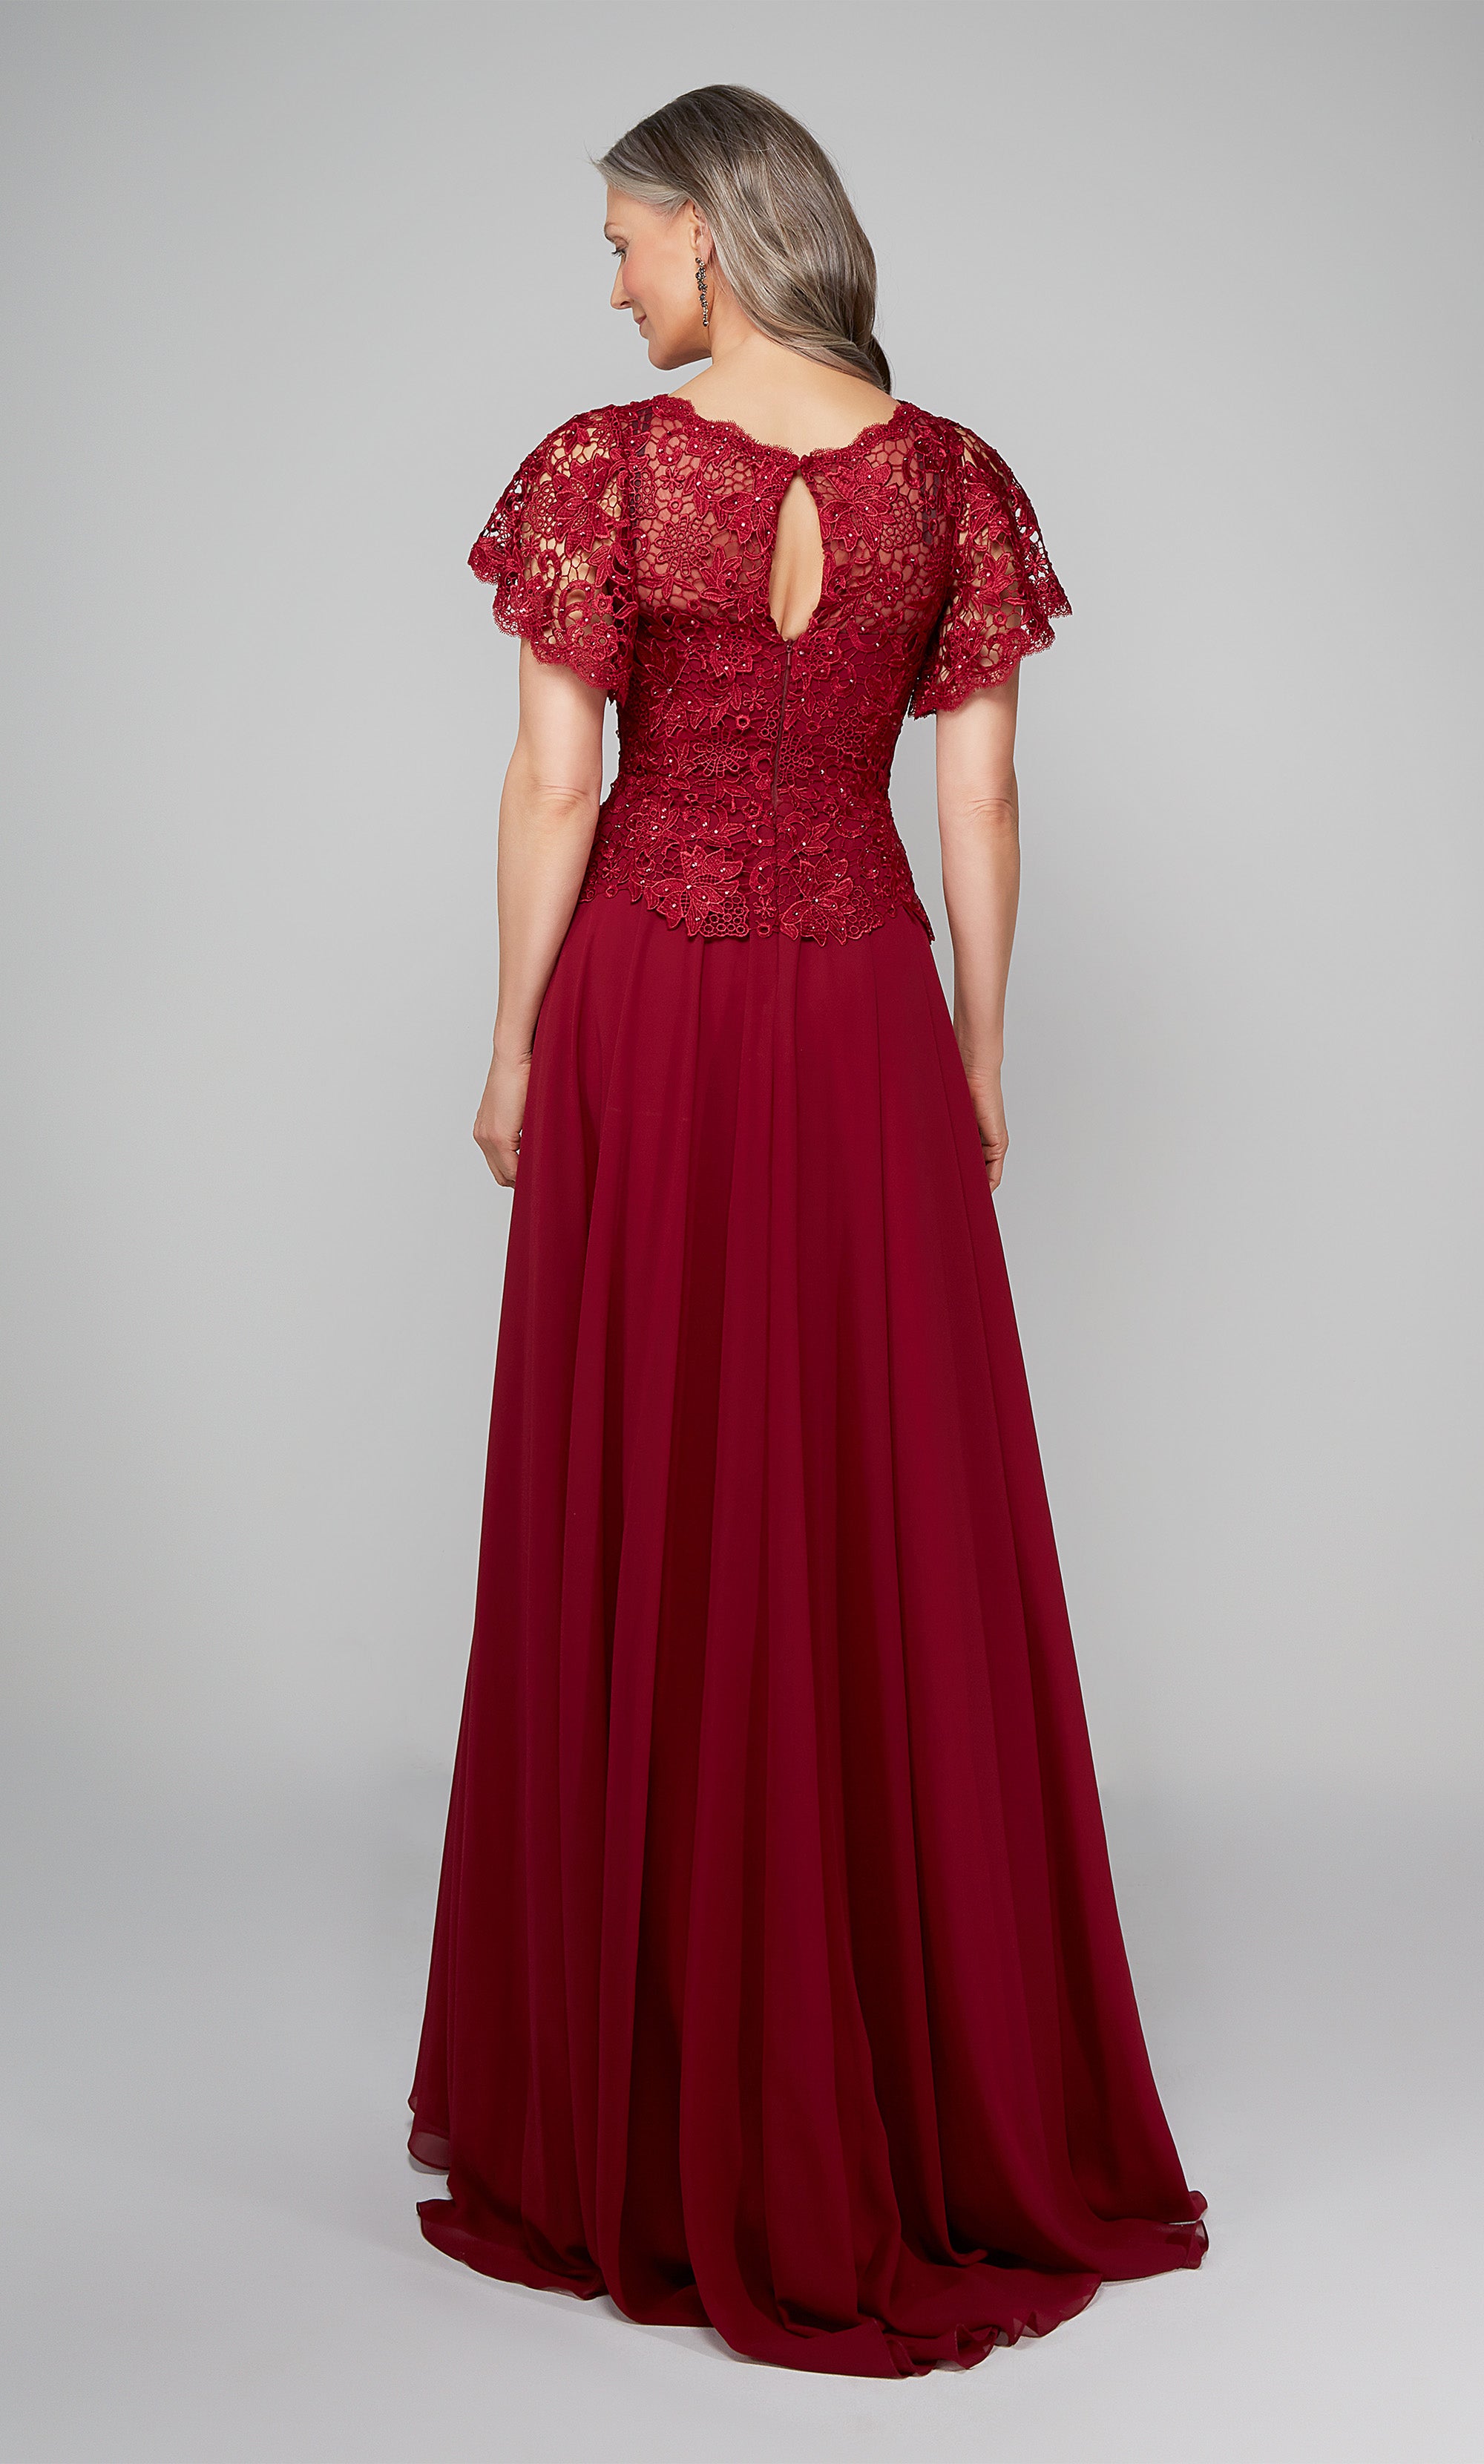 Long formal dress with lace peplum top with butterfly sleeves and a flowy chiffon skirt in wine red. COLOR-SWATCH_27469_WINE